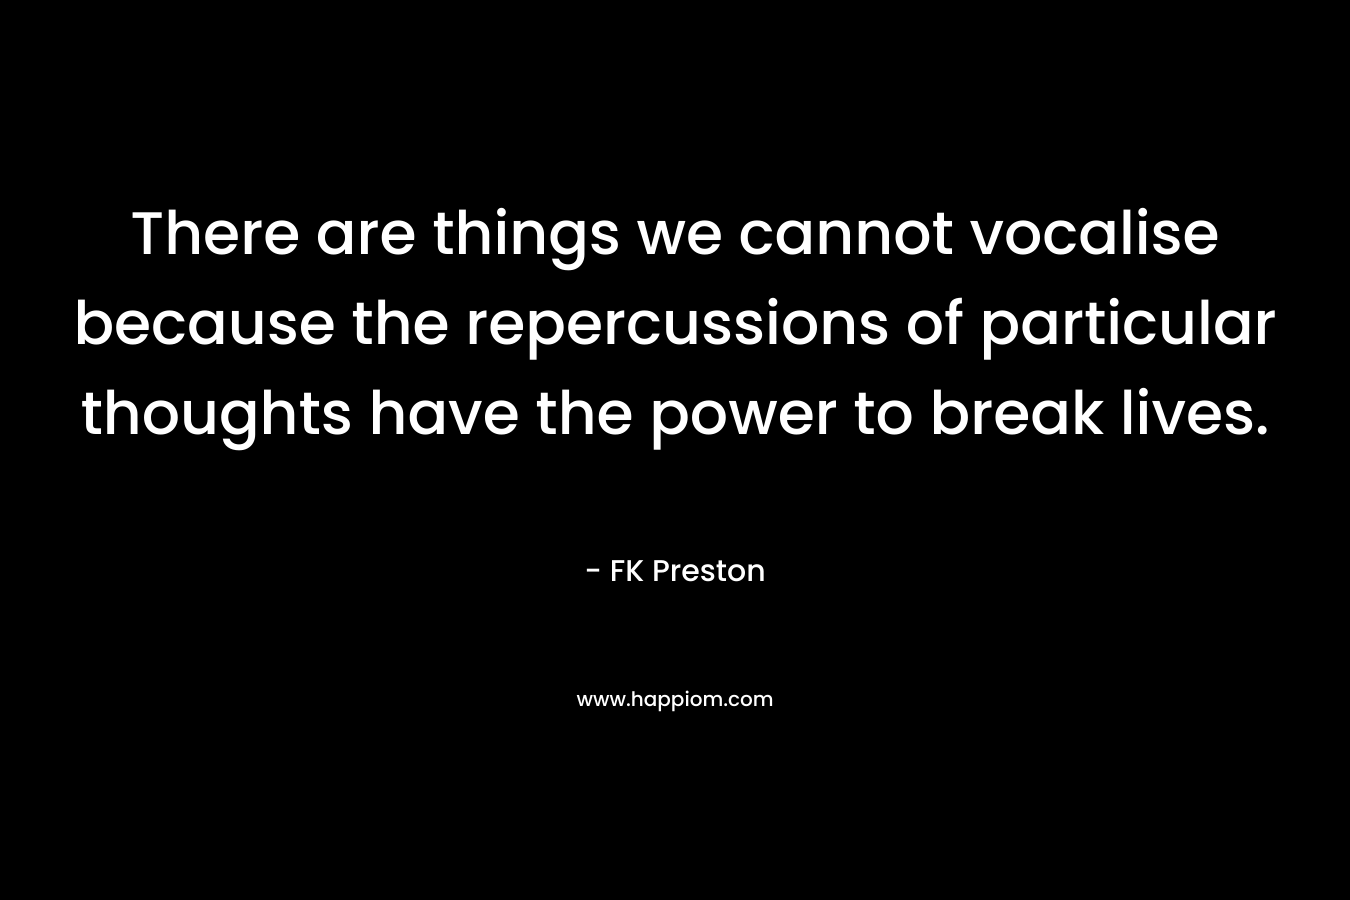 There are things we cannot vocalise because the repercussions of particular thoughts have the power to break lives. – FK Preston